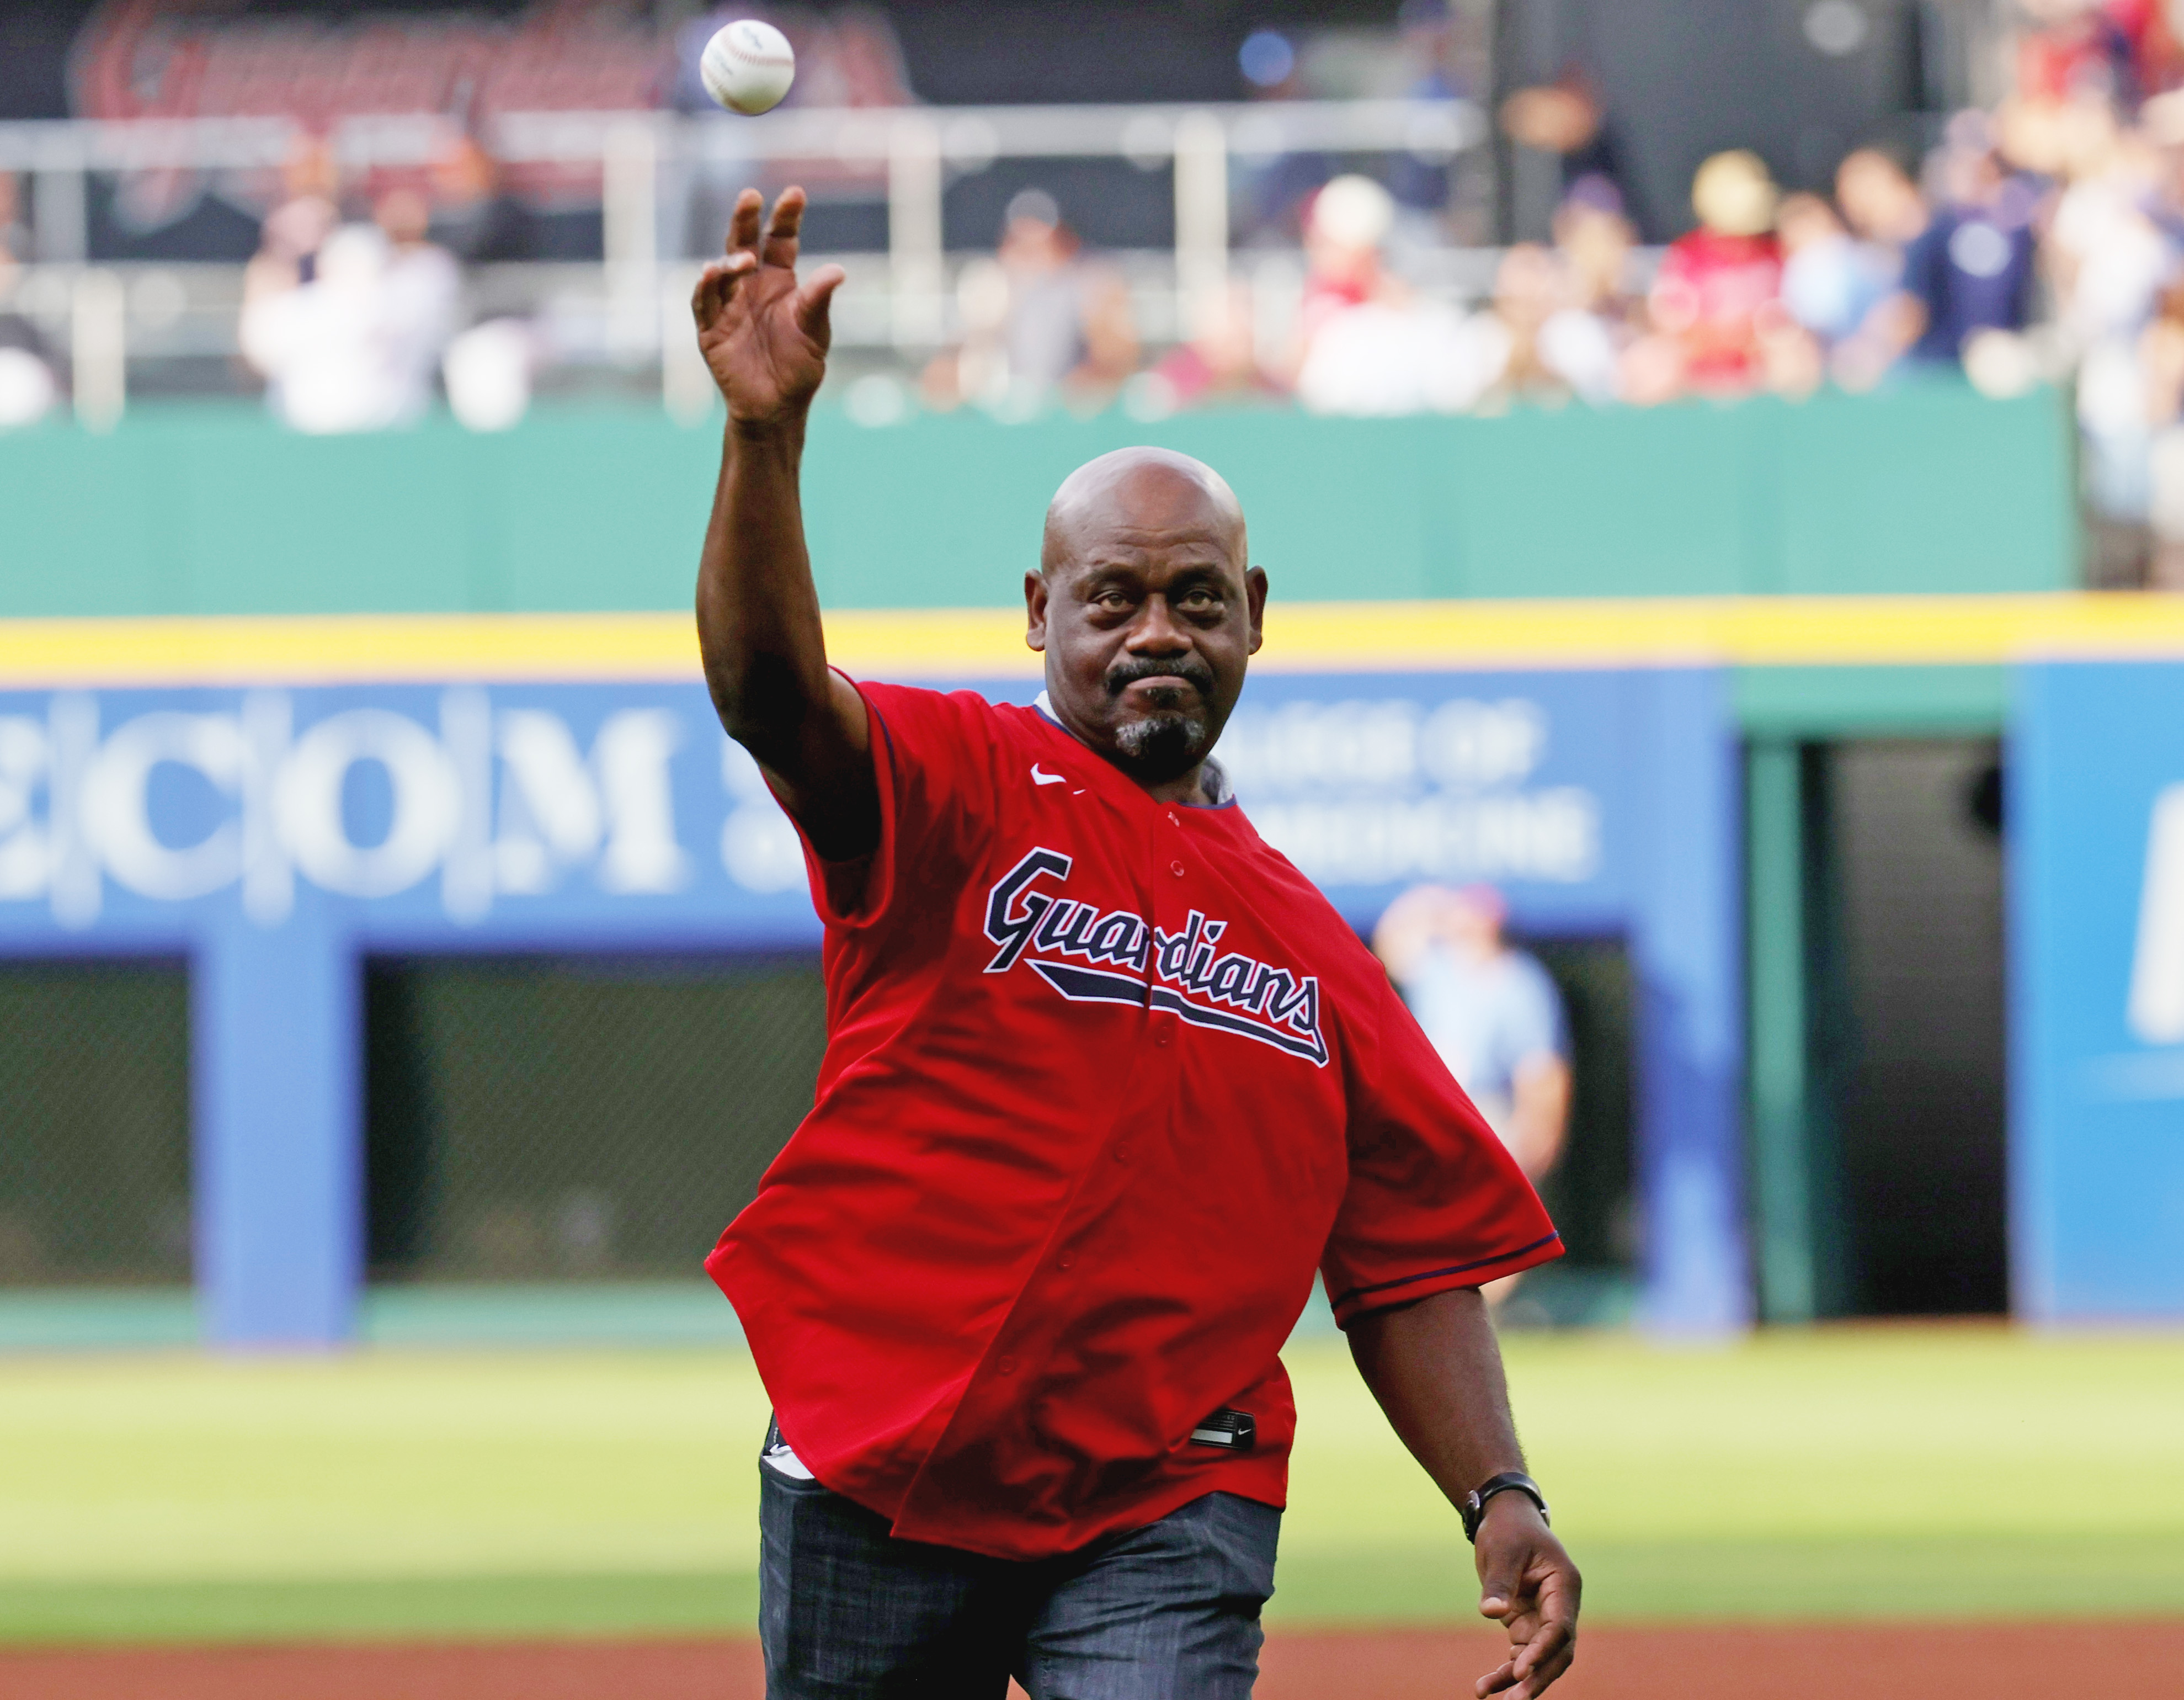 Former Cleveland Guardians player Marquis Grissom throws out the first pitch